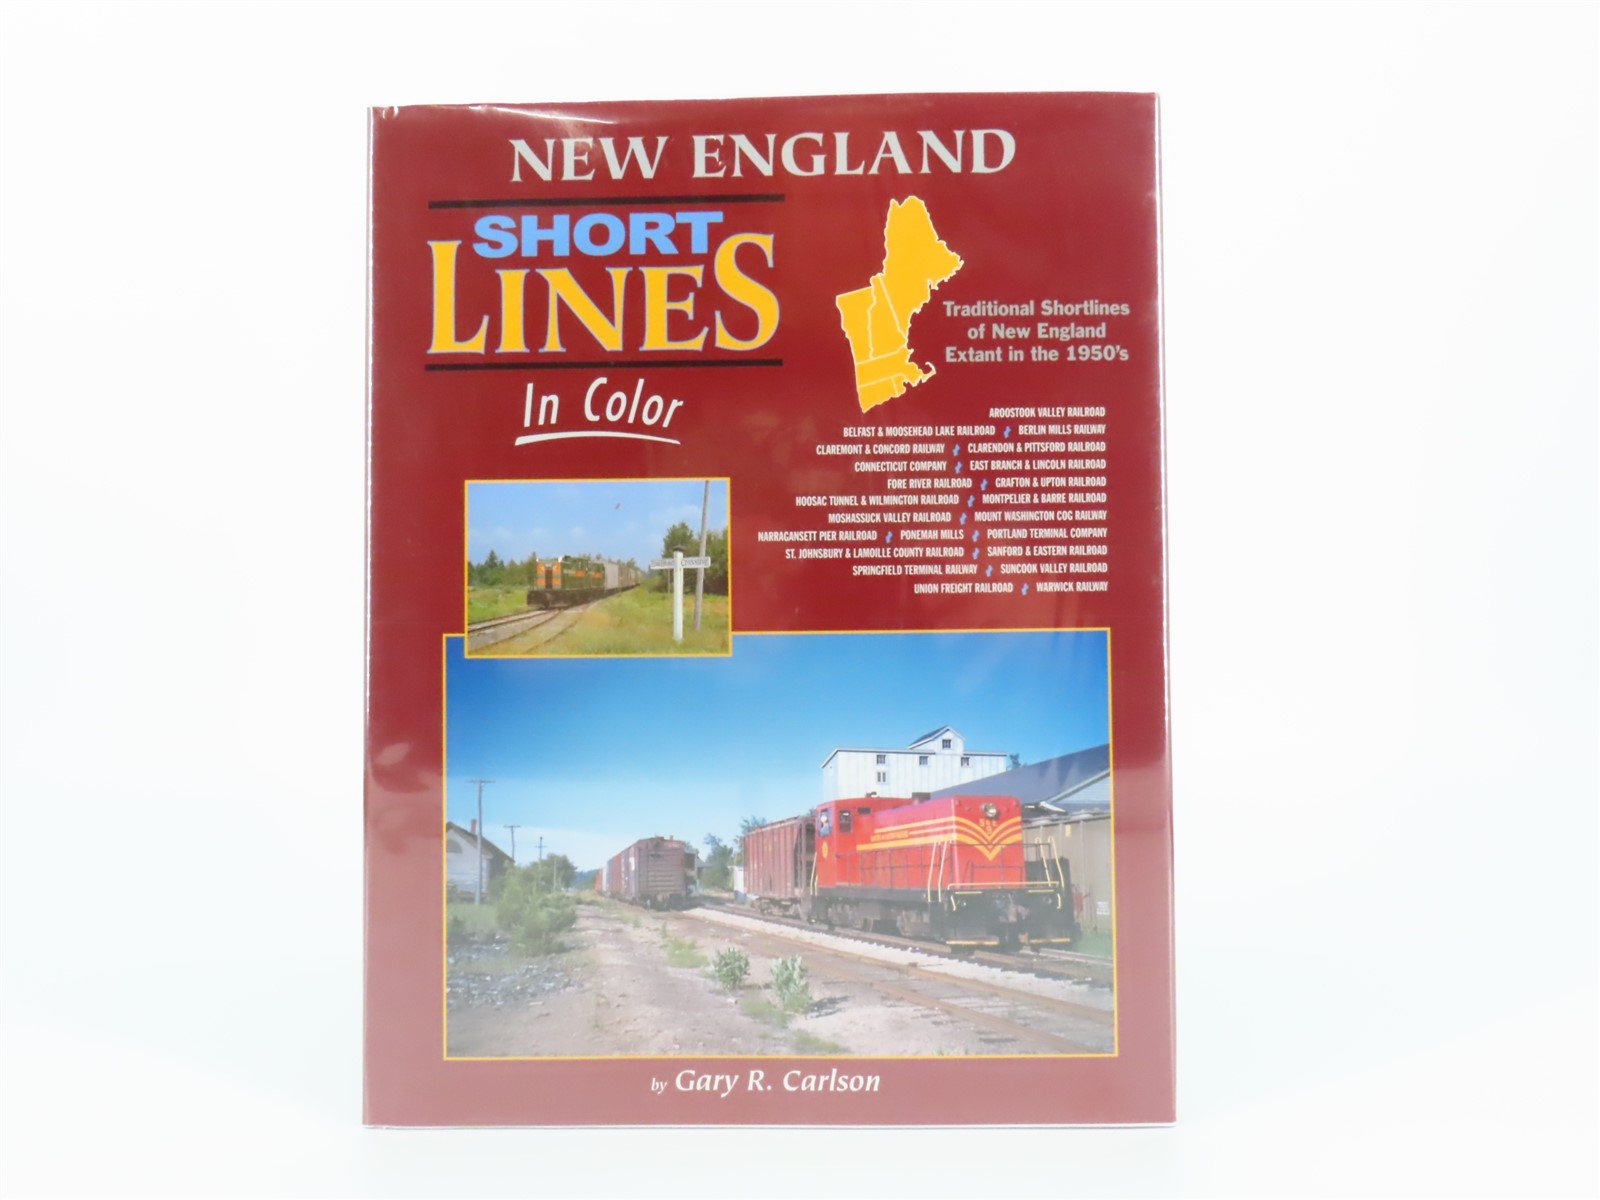 Morning Sun: New England Short Lines In Color by Gary R. Carlson ©2008 HC Book